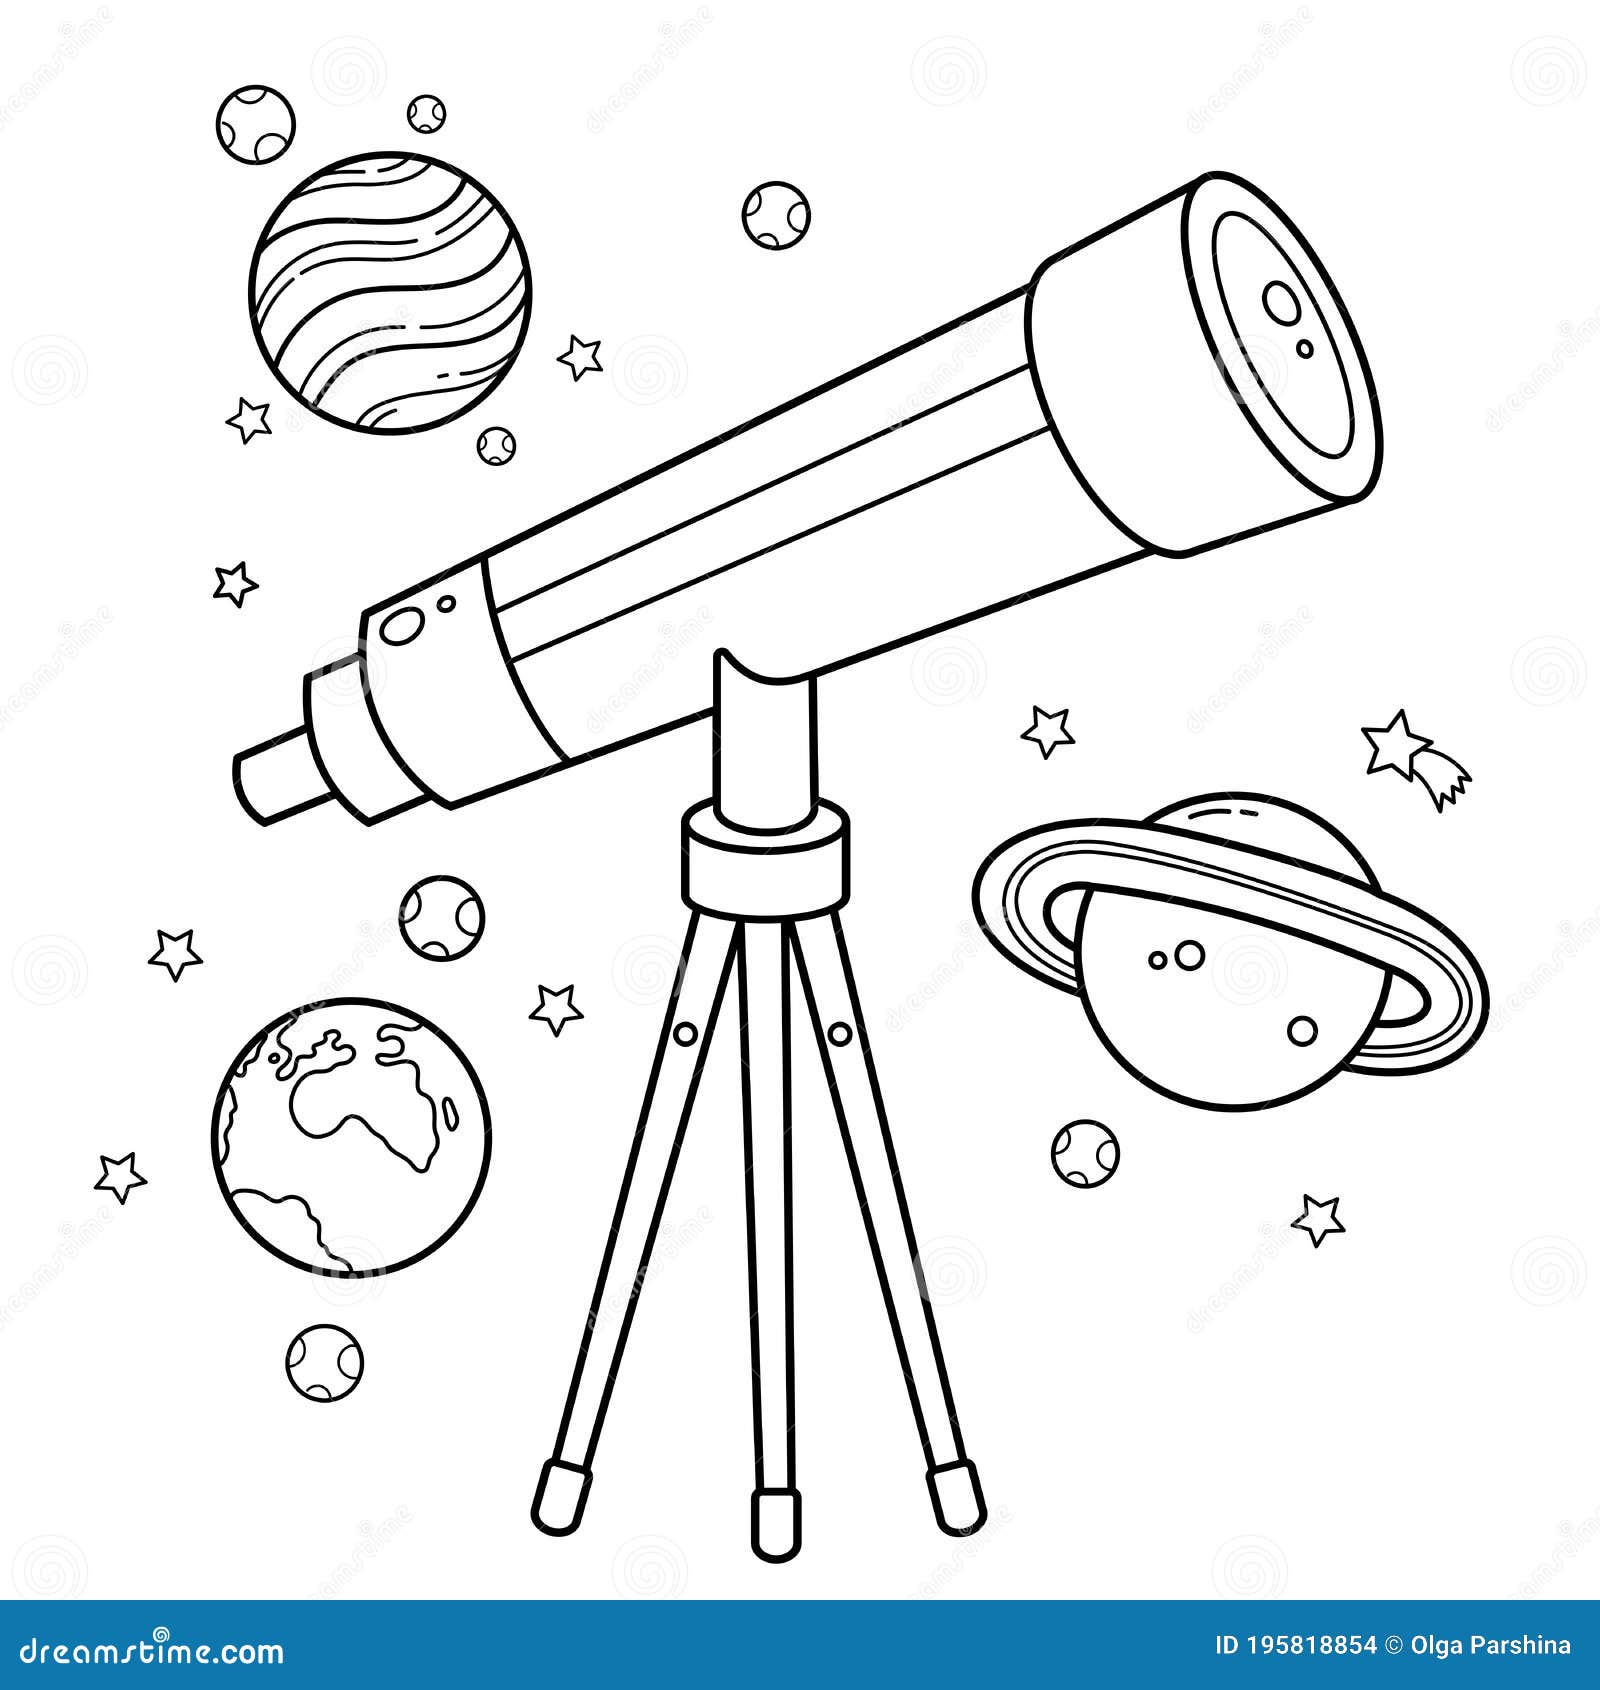 Download Coloring Page Outline Of A Cartoon Telescope With Stars And Planets. Space And Astronomy ...